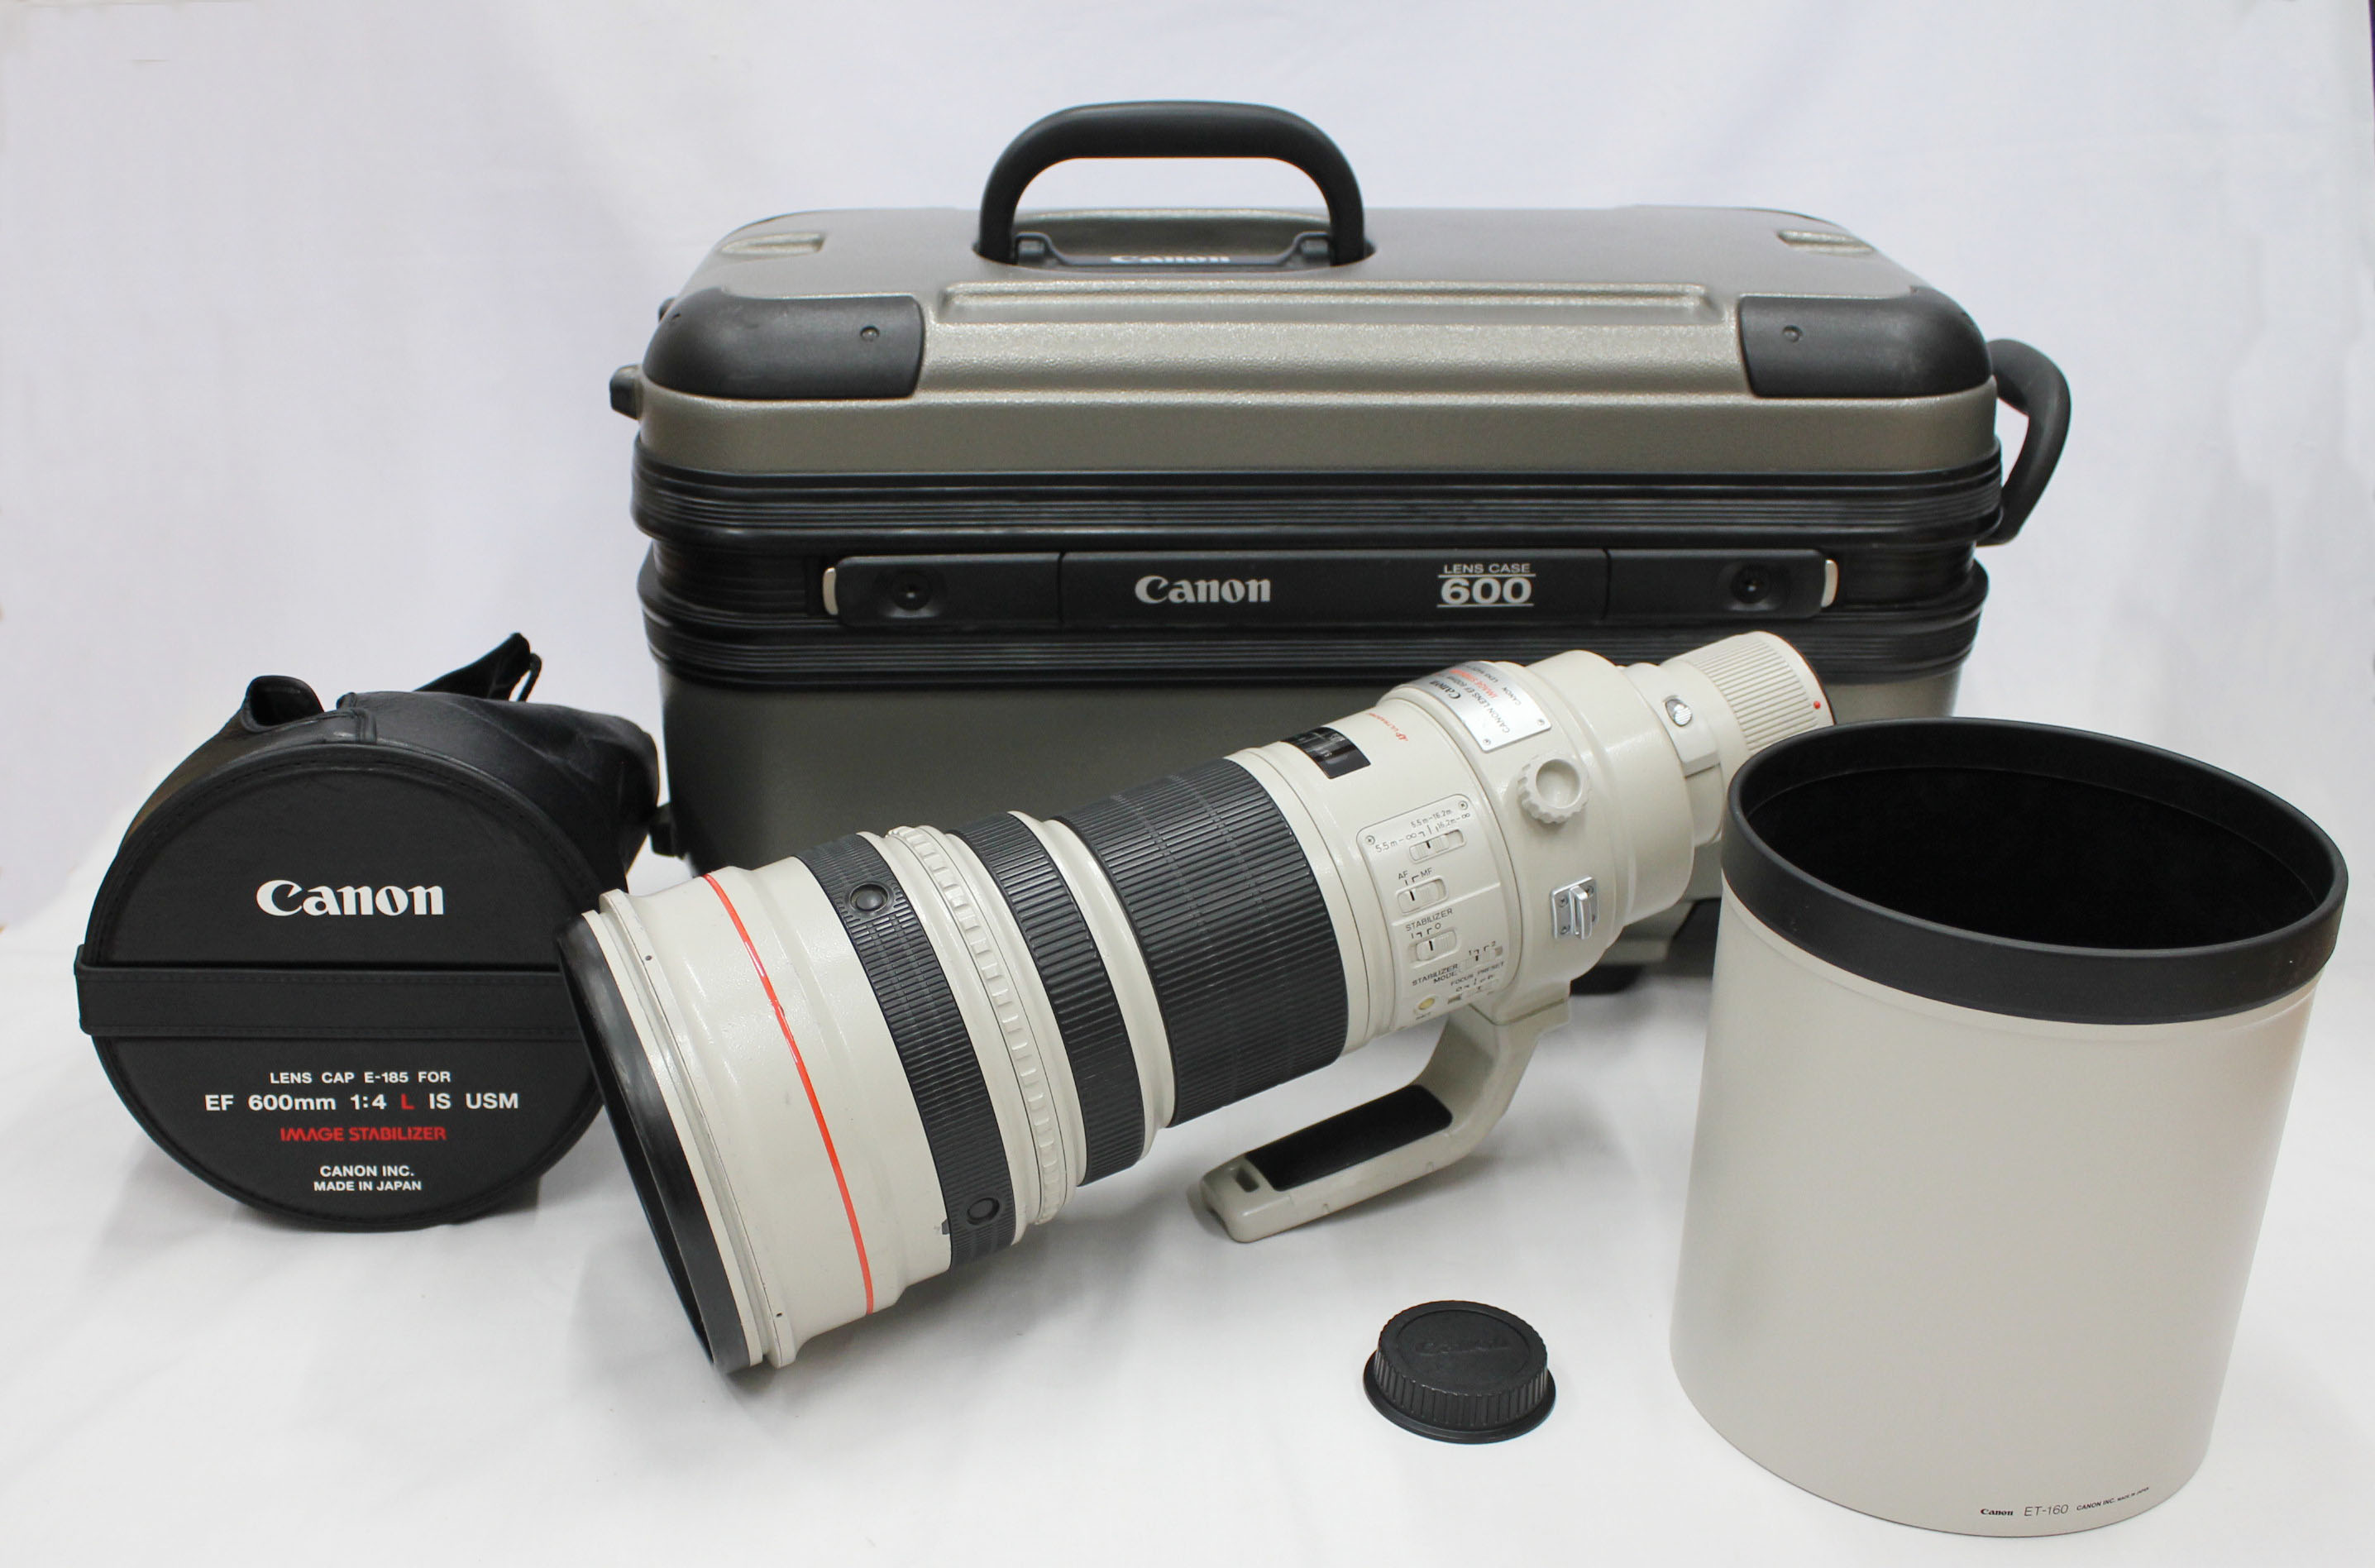 Canon EF 600mm F4 L IS USM Super Telephoto Lens with Hood & Case from Japan